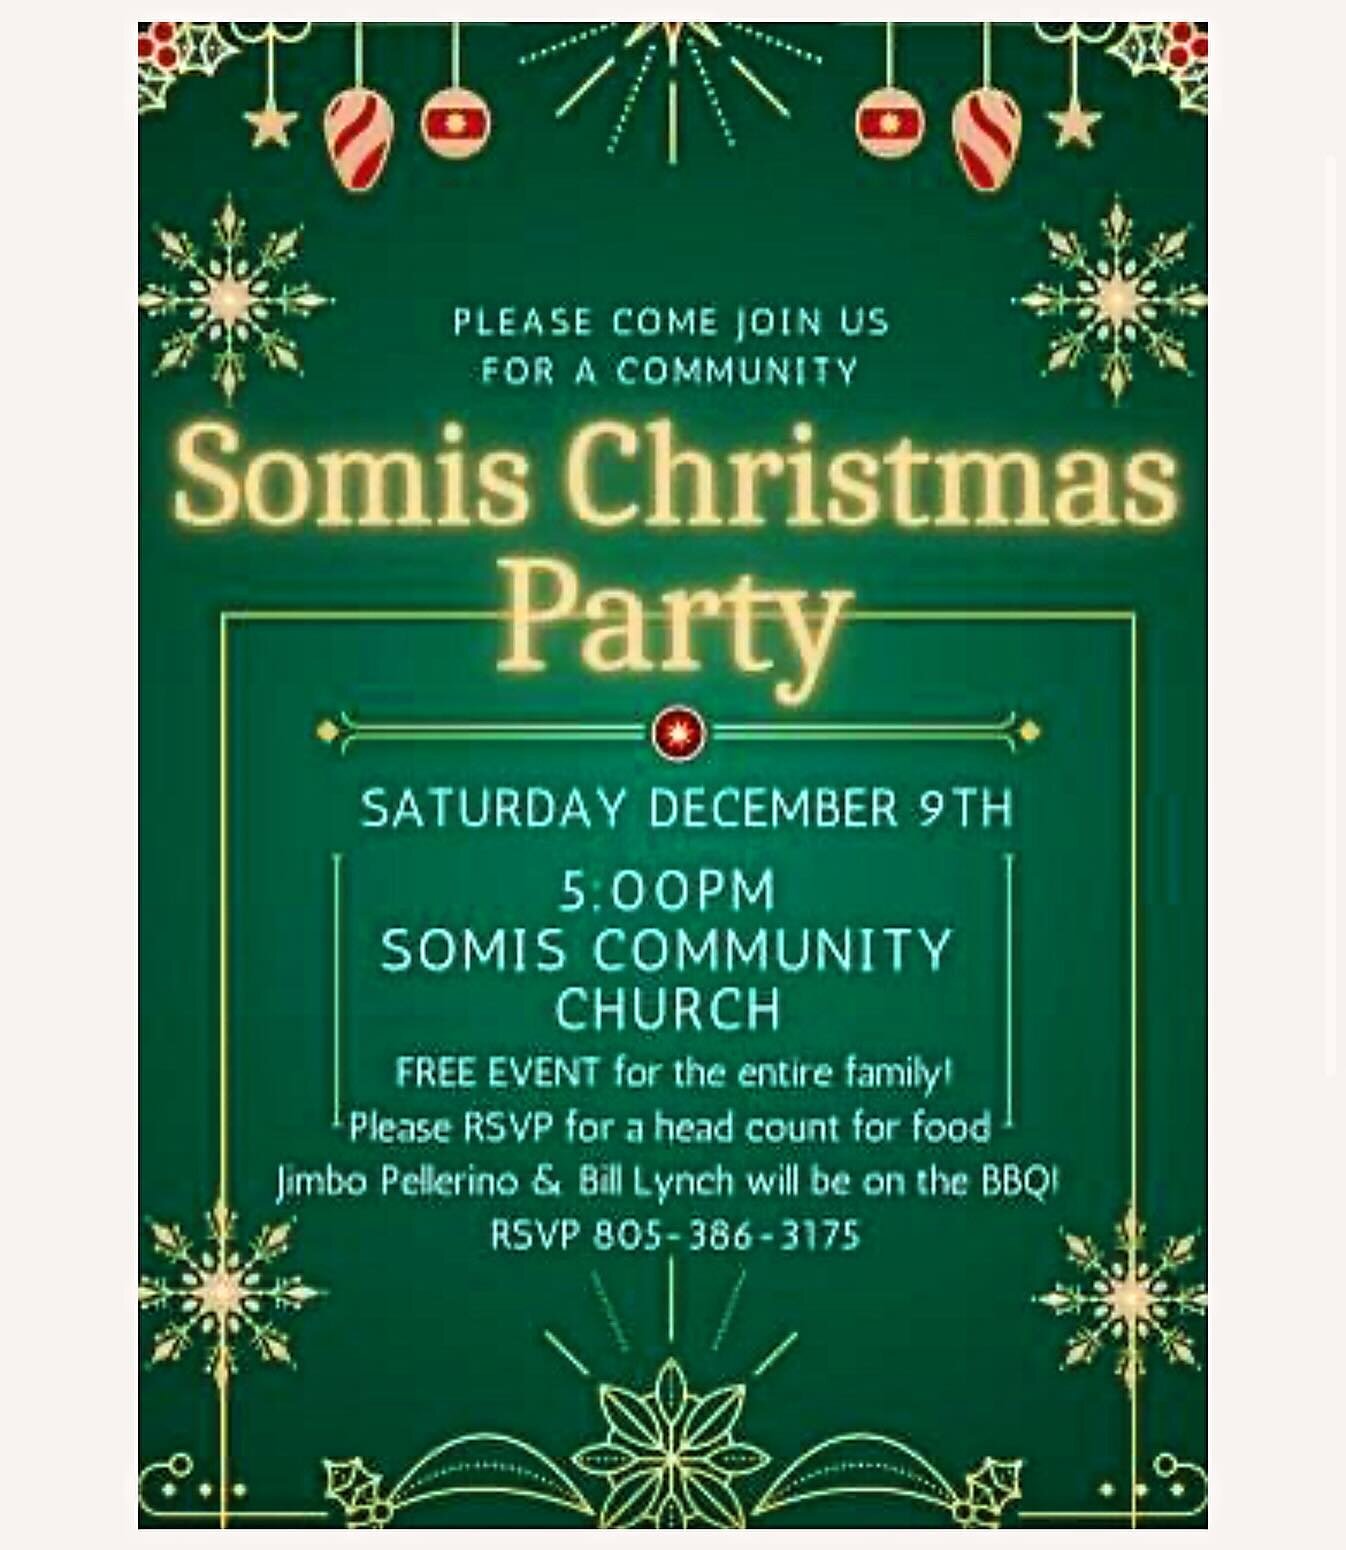 invite #friends #family &amp; #neighbors to our #somis #christmasparty delicious BBQ dinner followed by #fun #games #songs #freeevent but would appreciate an RSVP to 805-386-3175 so we can make sure we have enough #food #somiscommunitychurch #bettert